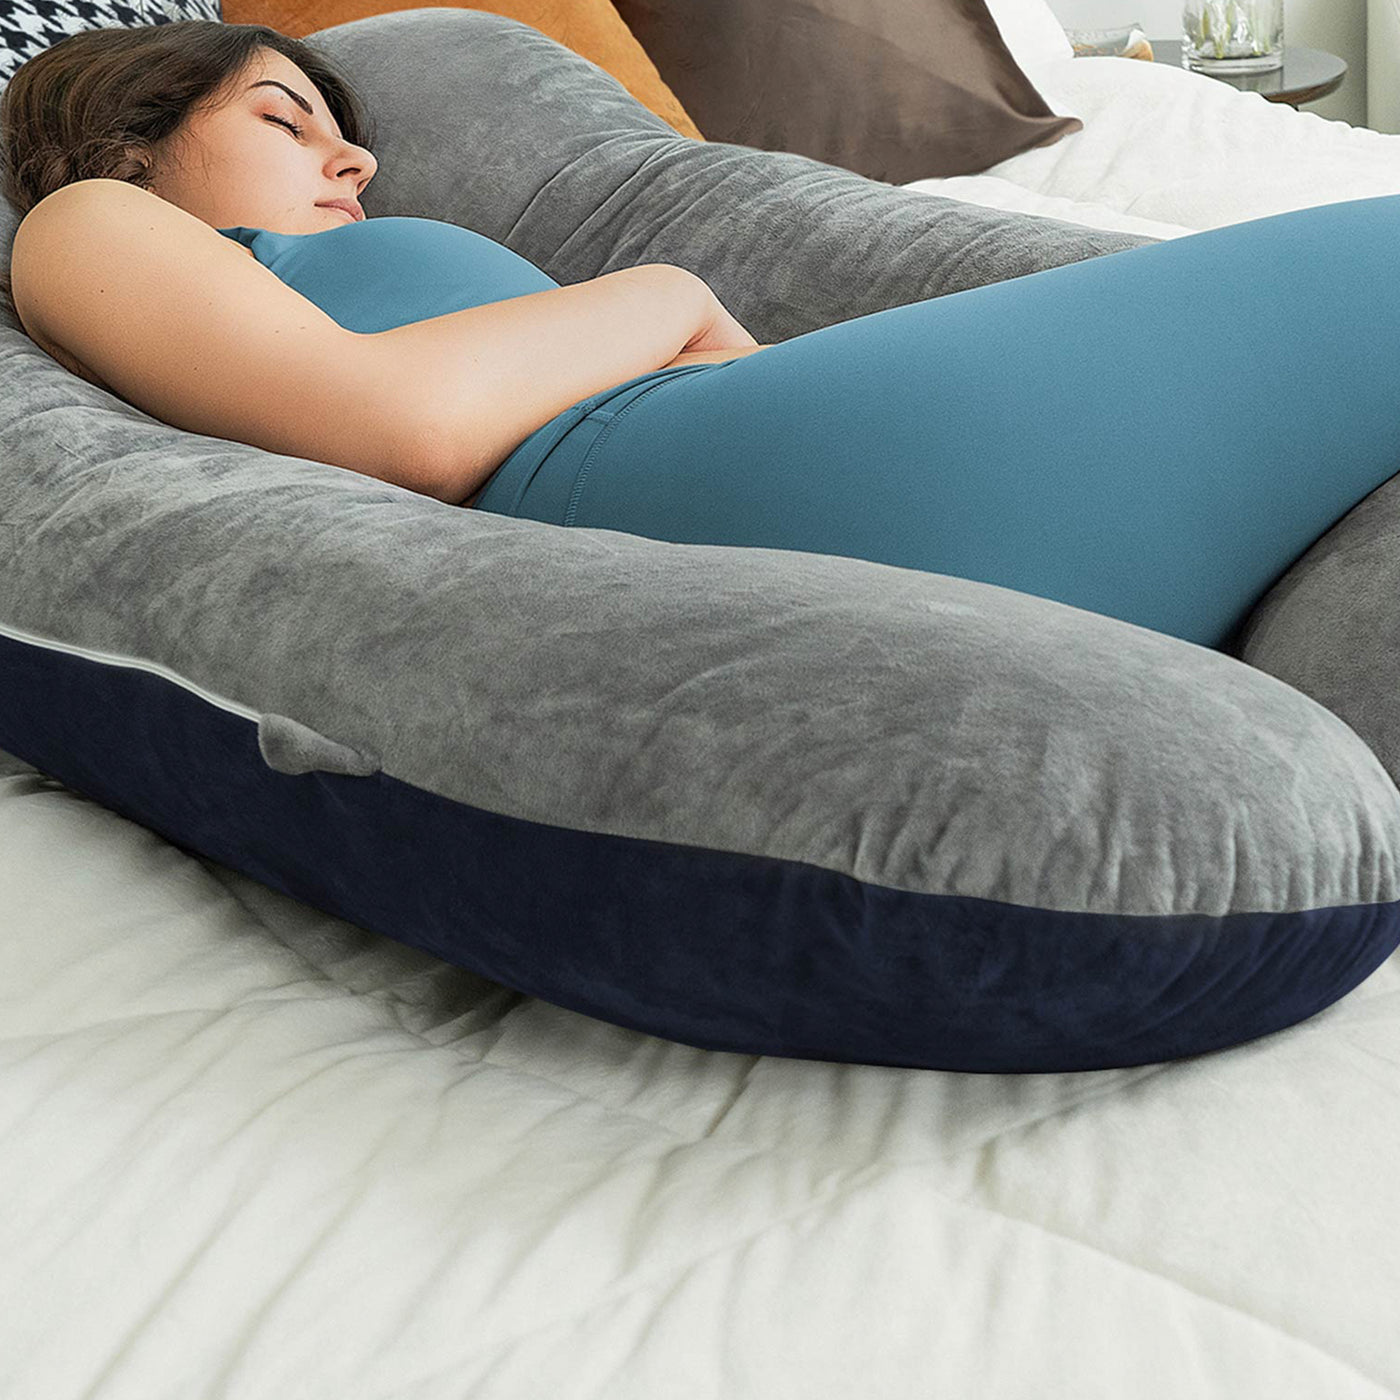 55" Classic U-shaped Pregnancy Pillow (Blue and Gray)